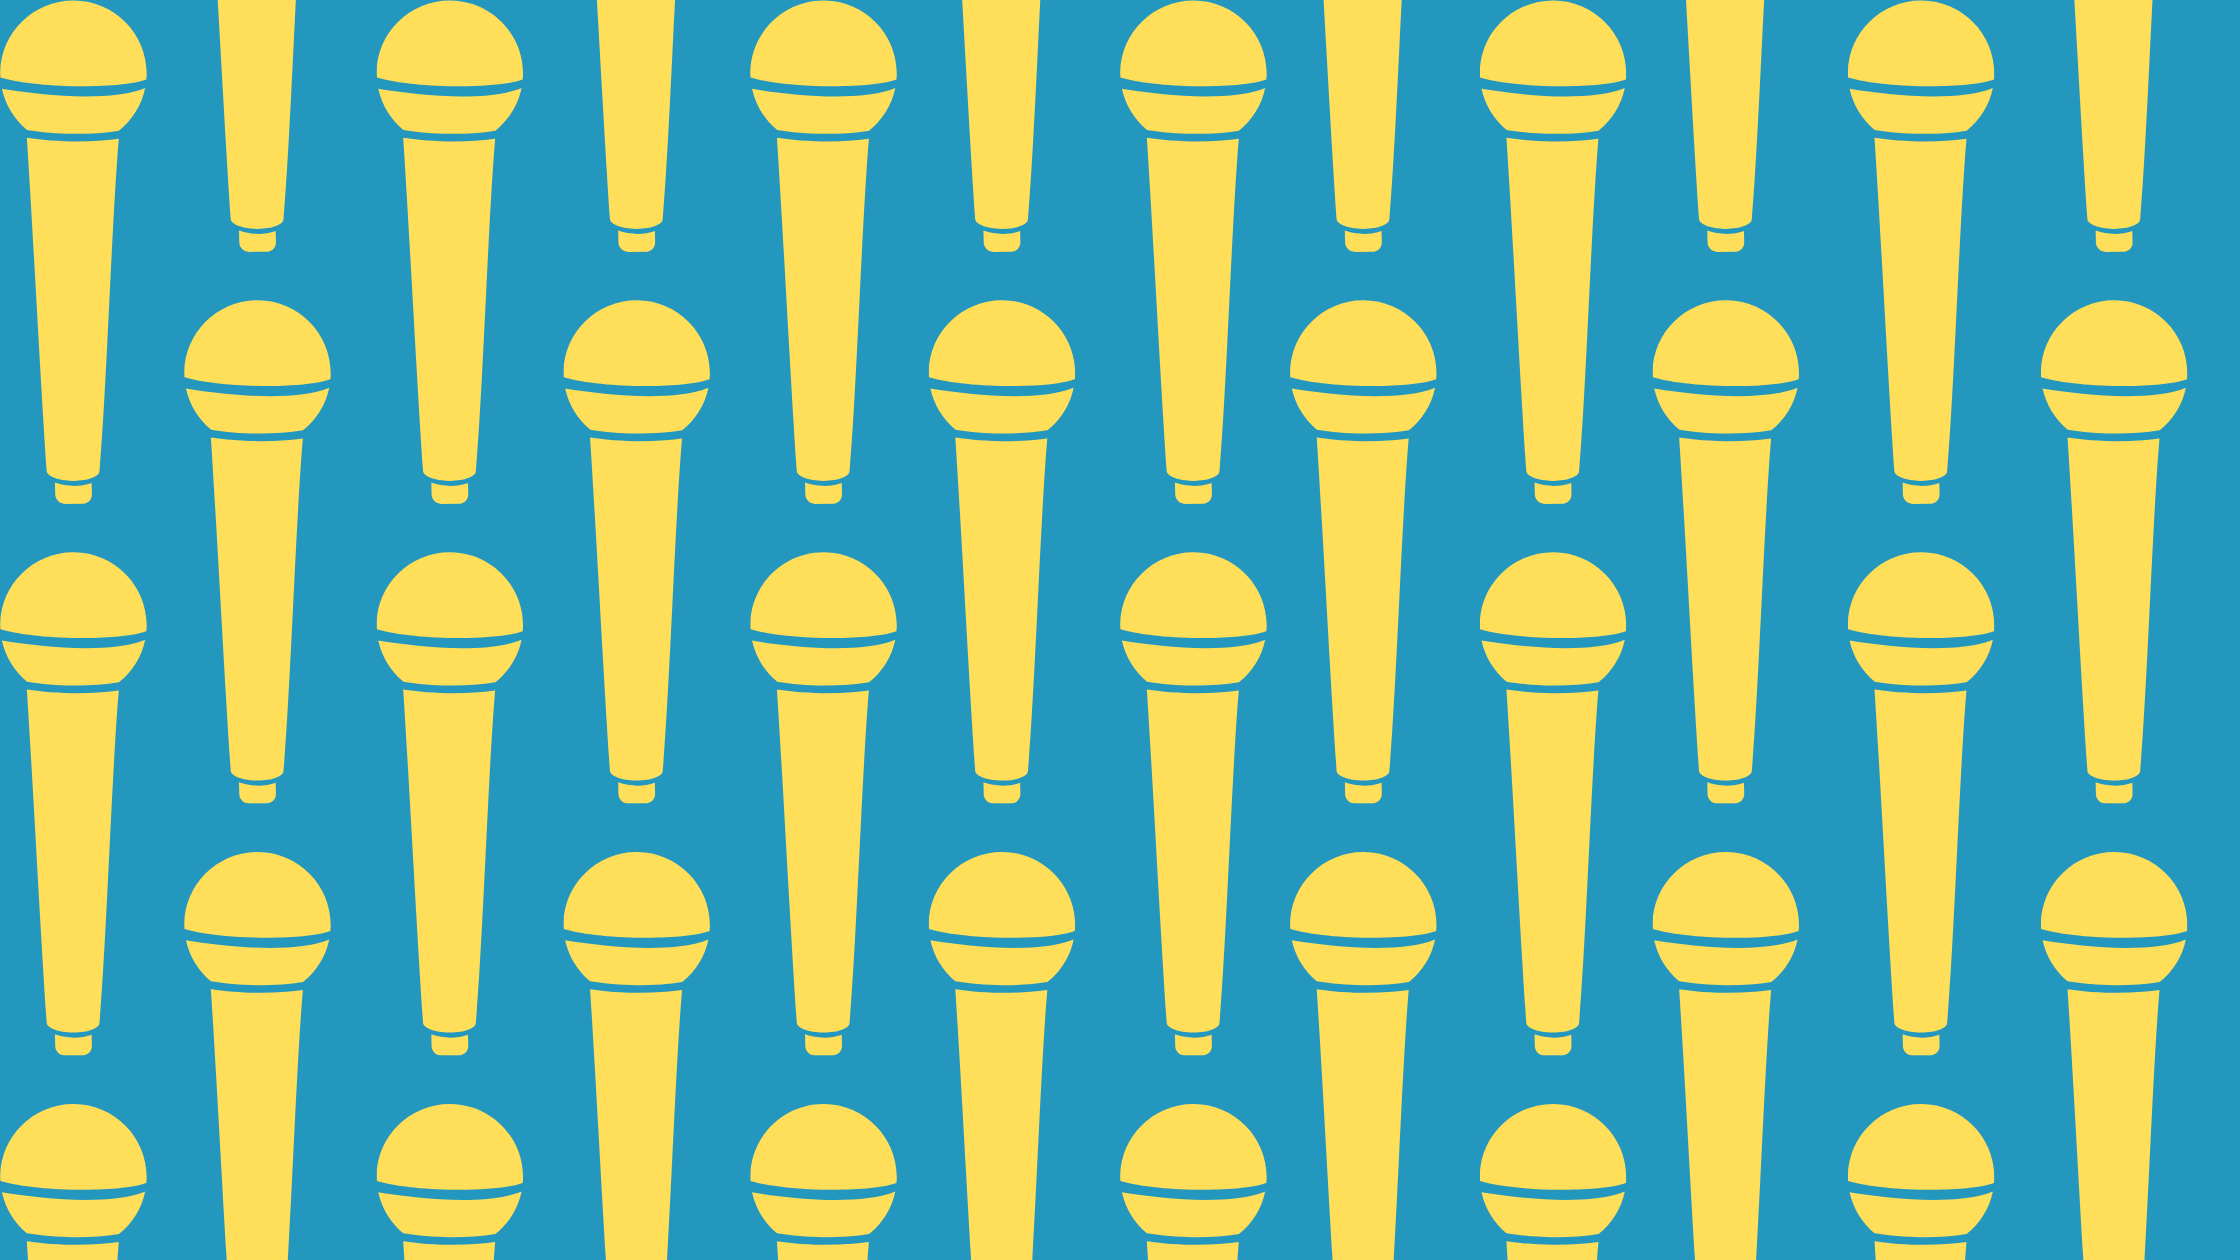 A repeating pattern of microphone graphics